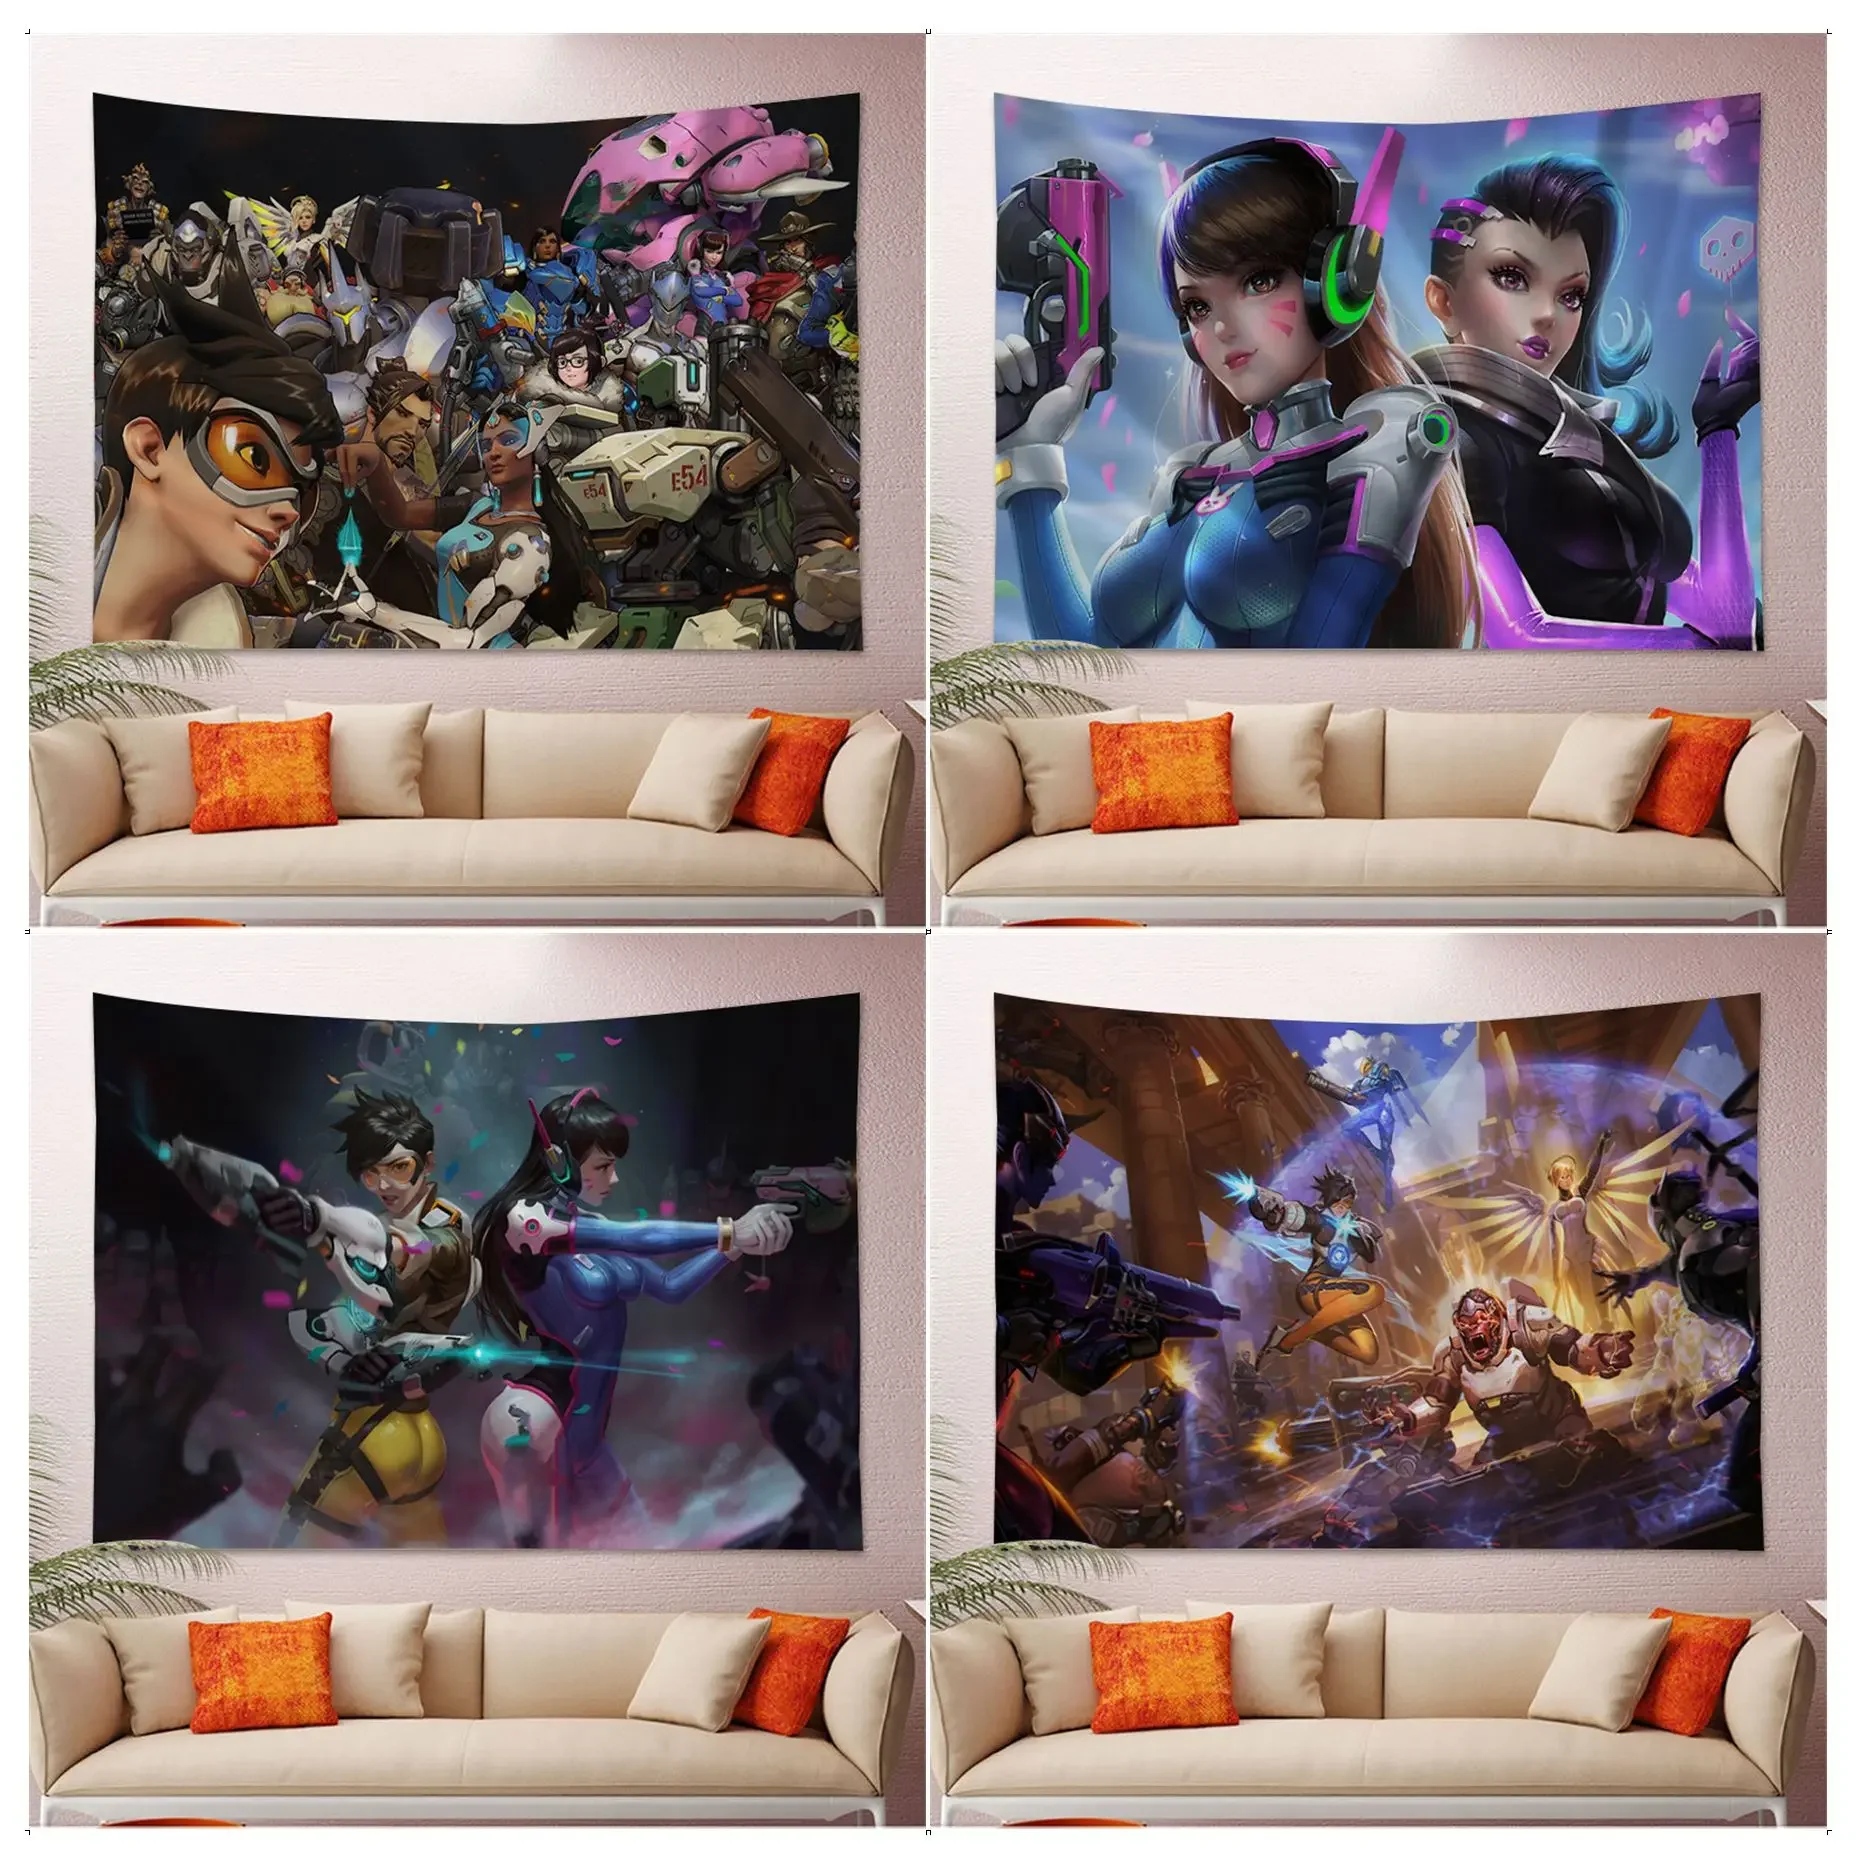 

O-Overwatch Game Tapestry Hanging Bohemian Tapestry Indian Buddha Wall Decoration Witchcraft Bohemian Hippie Cheap Hippie Wall